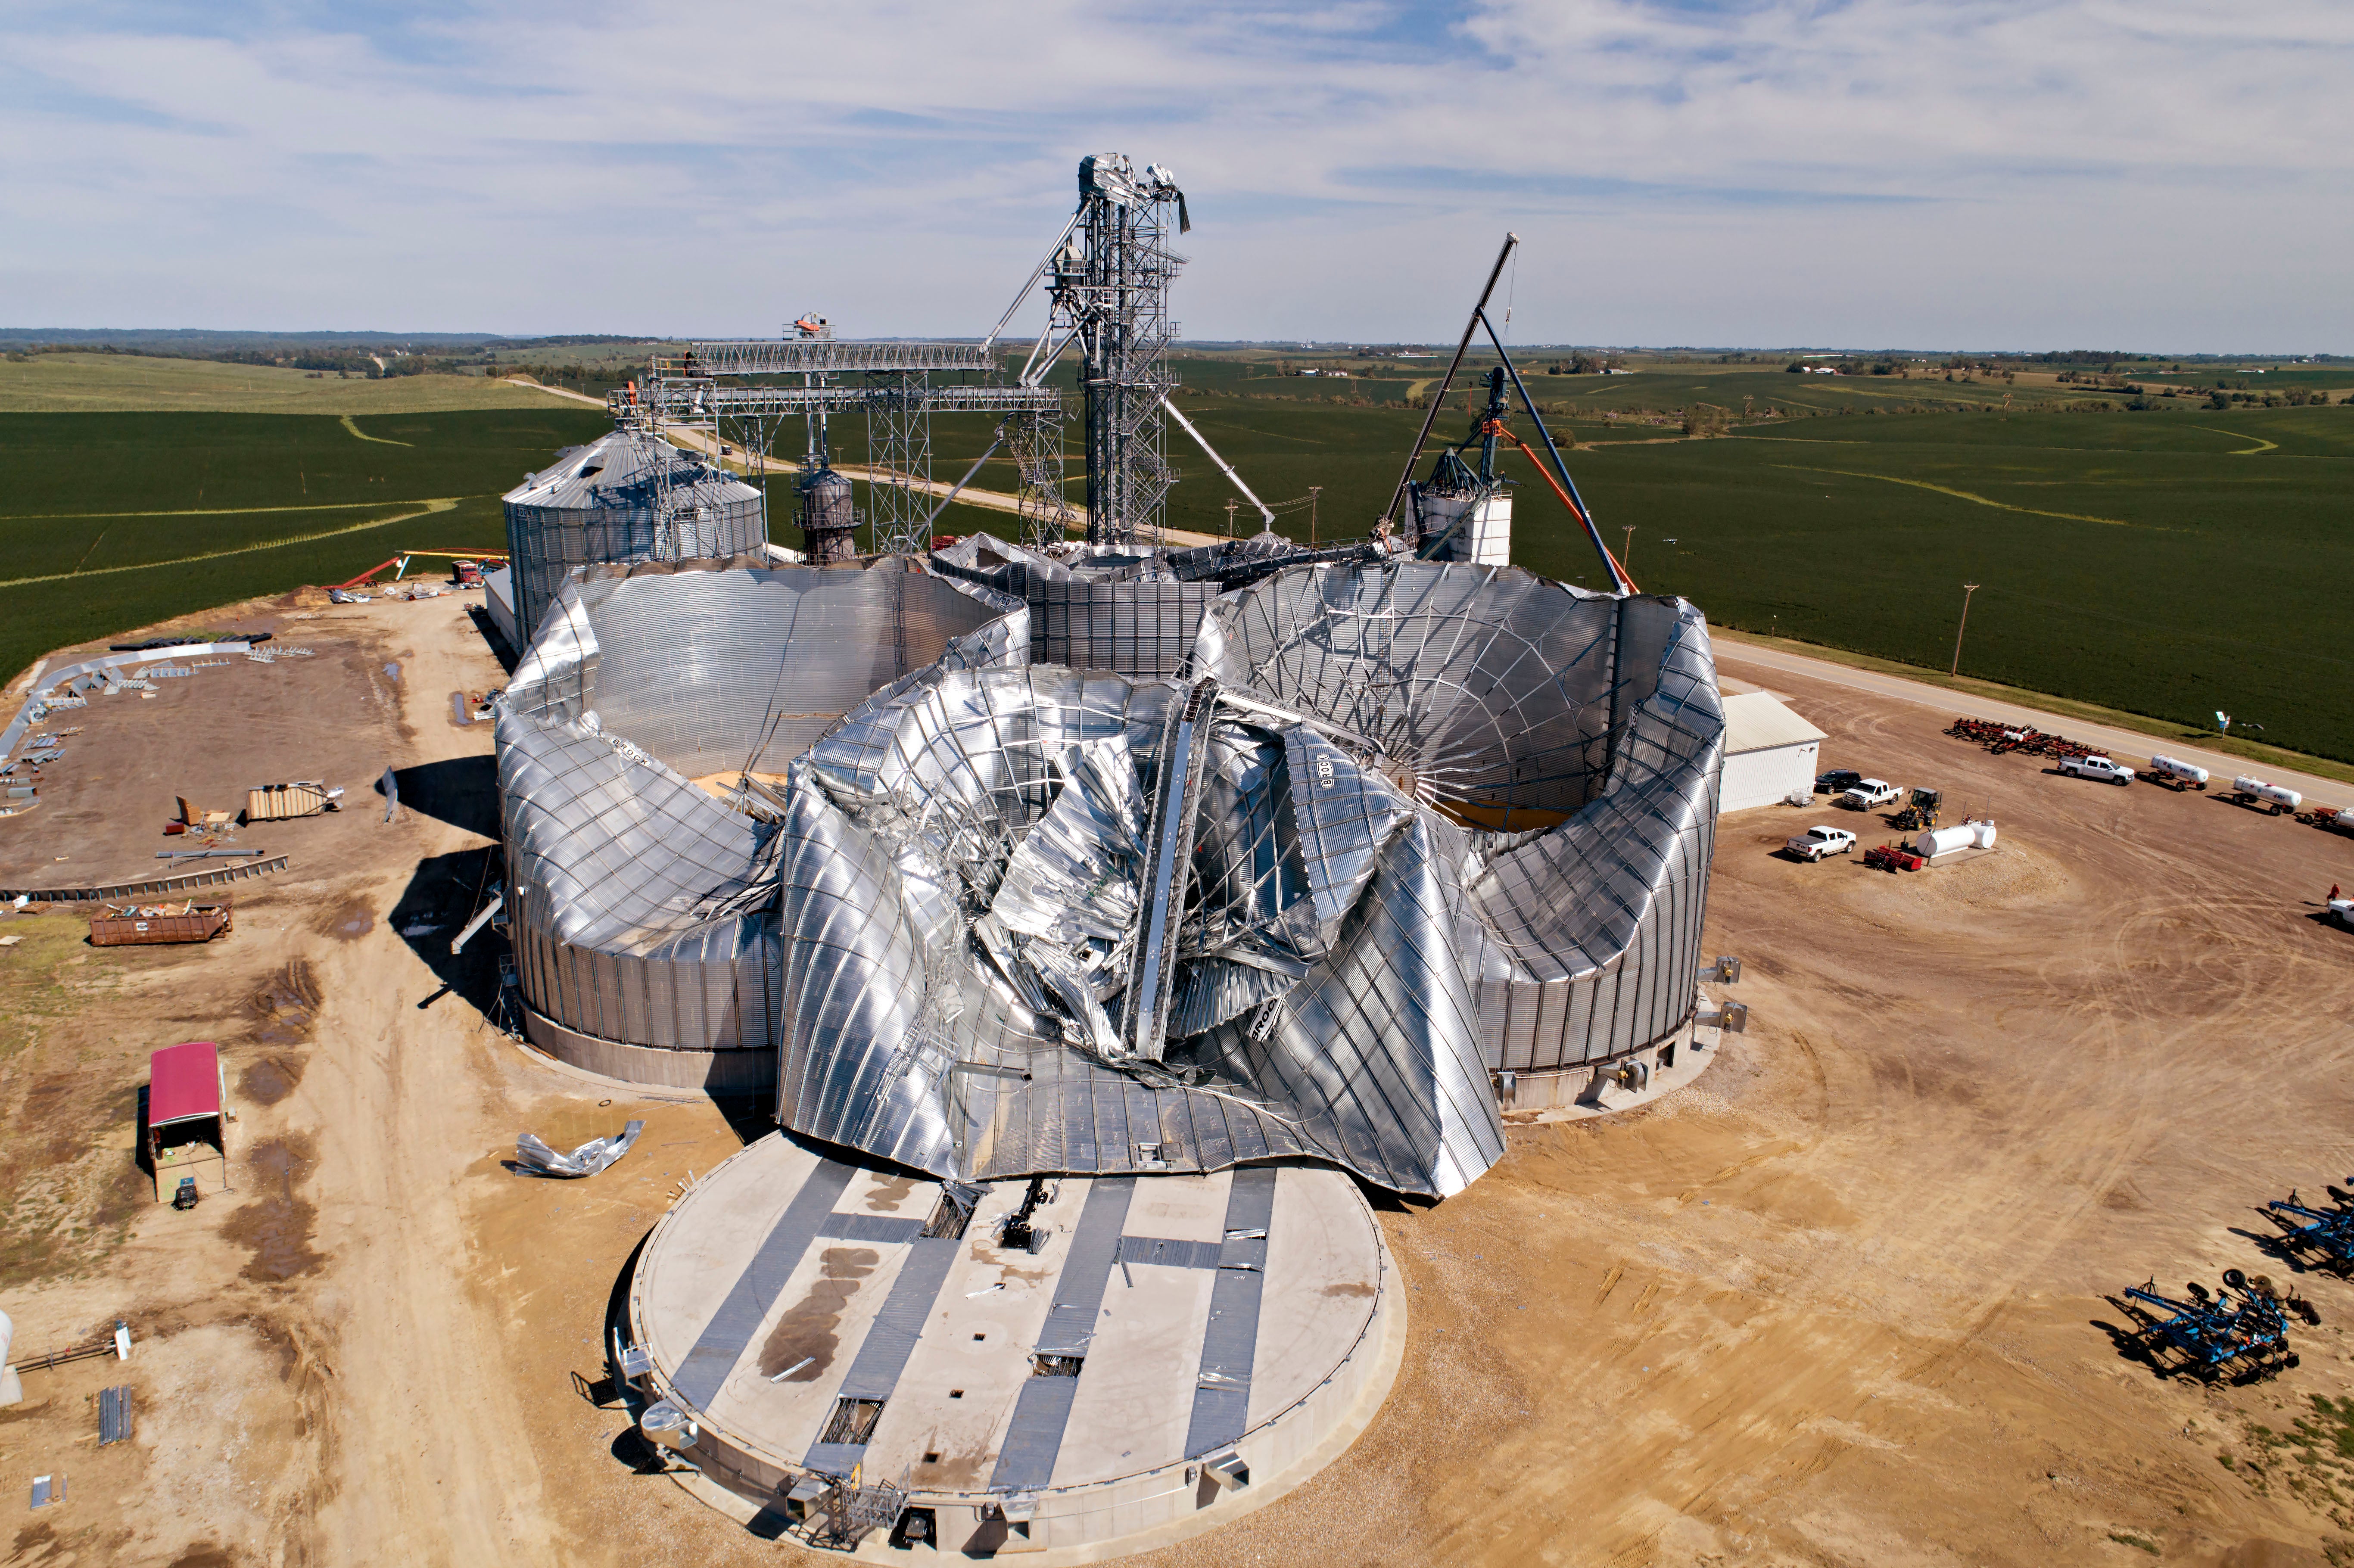 Damaged grain bins in Marshalltown, Iowa following a powerful derecho last August. Nearly a third of the state's crop land was damaged in the powerful storm